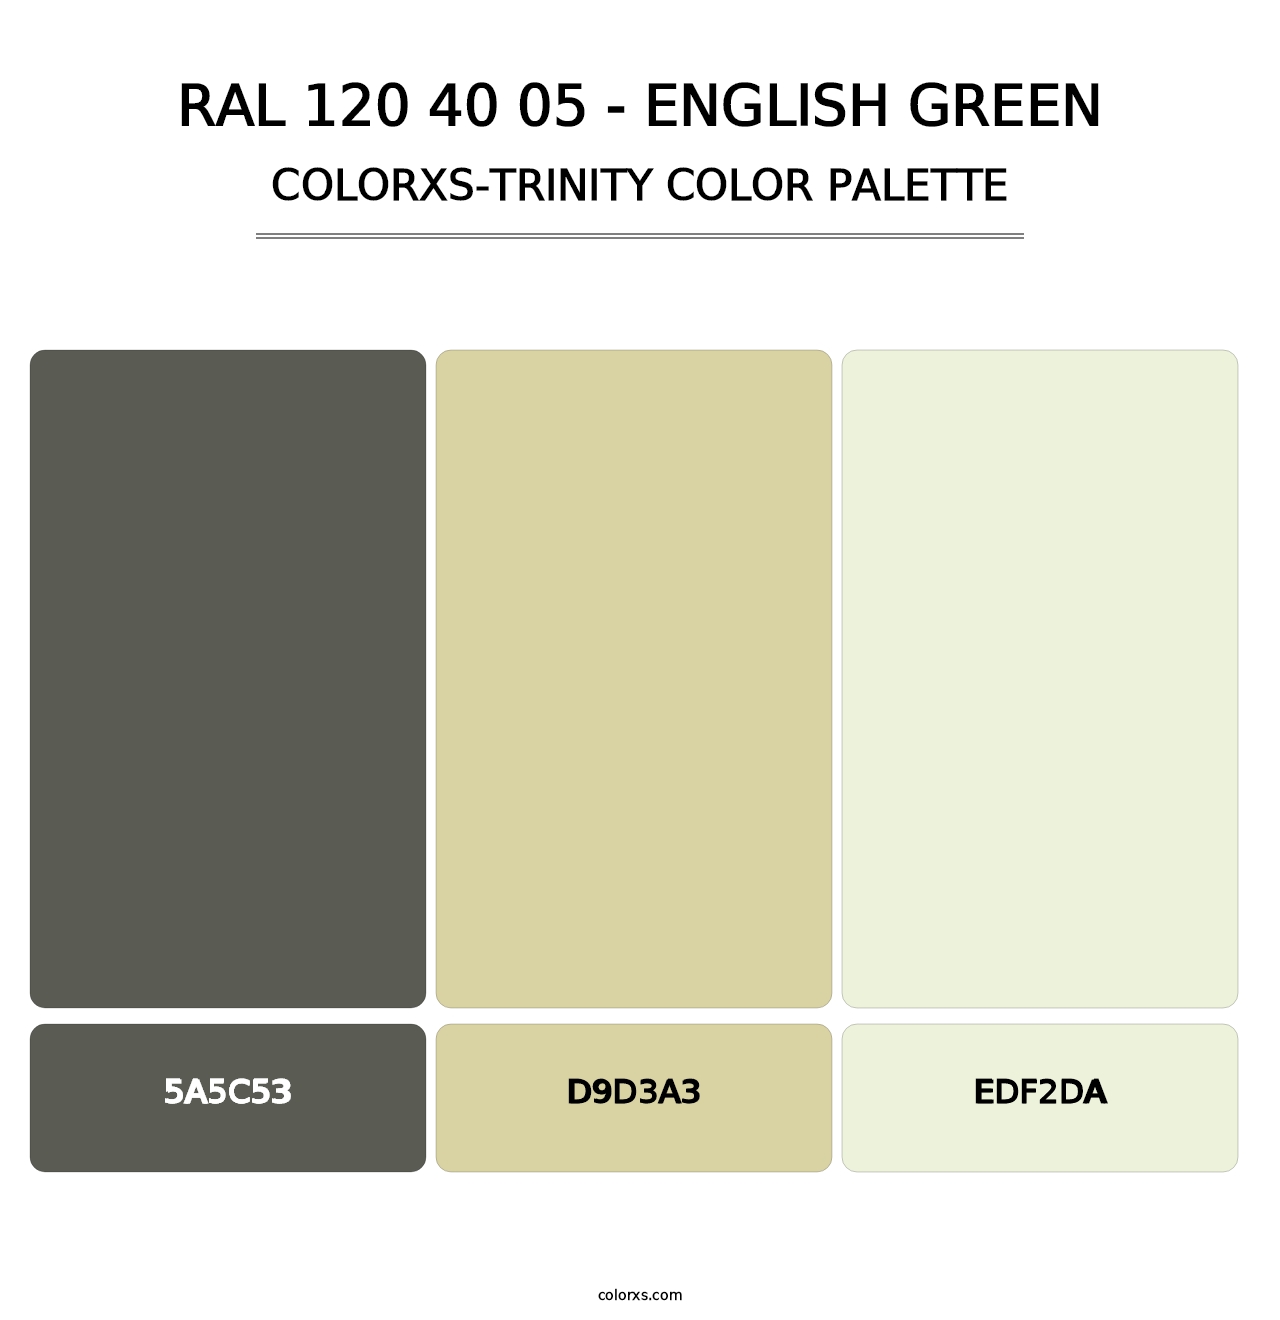 RAL 120 40 05 - English Green - Colorxs Trinity Palette